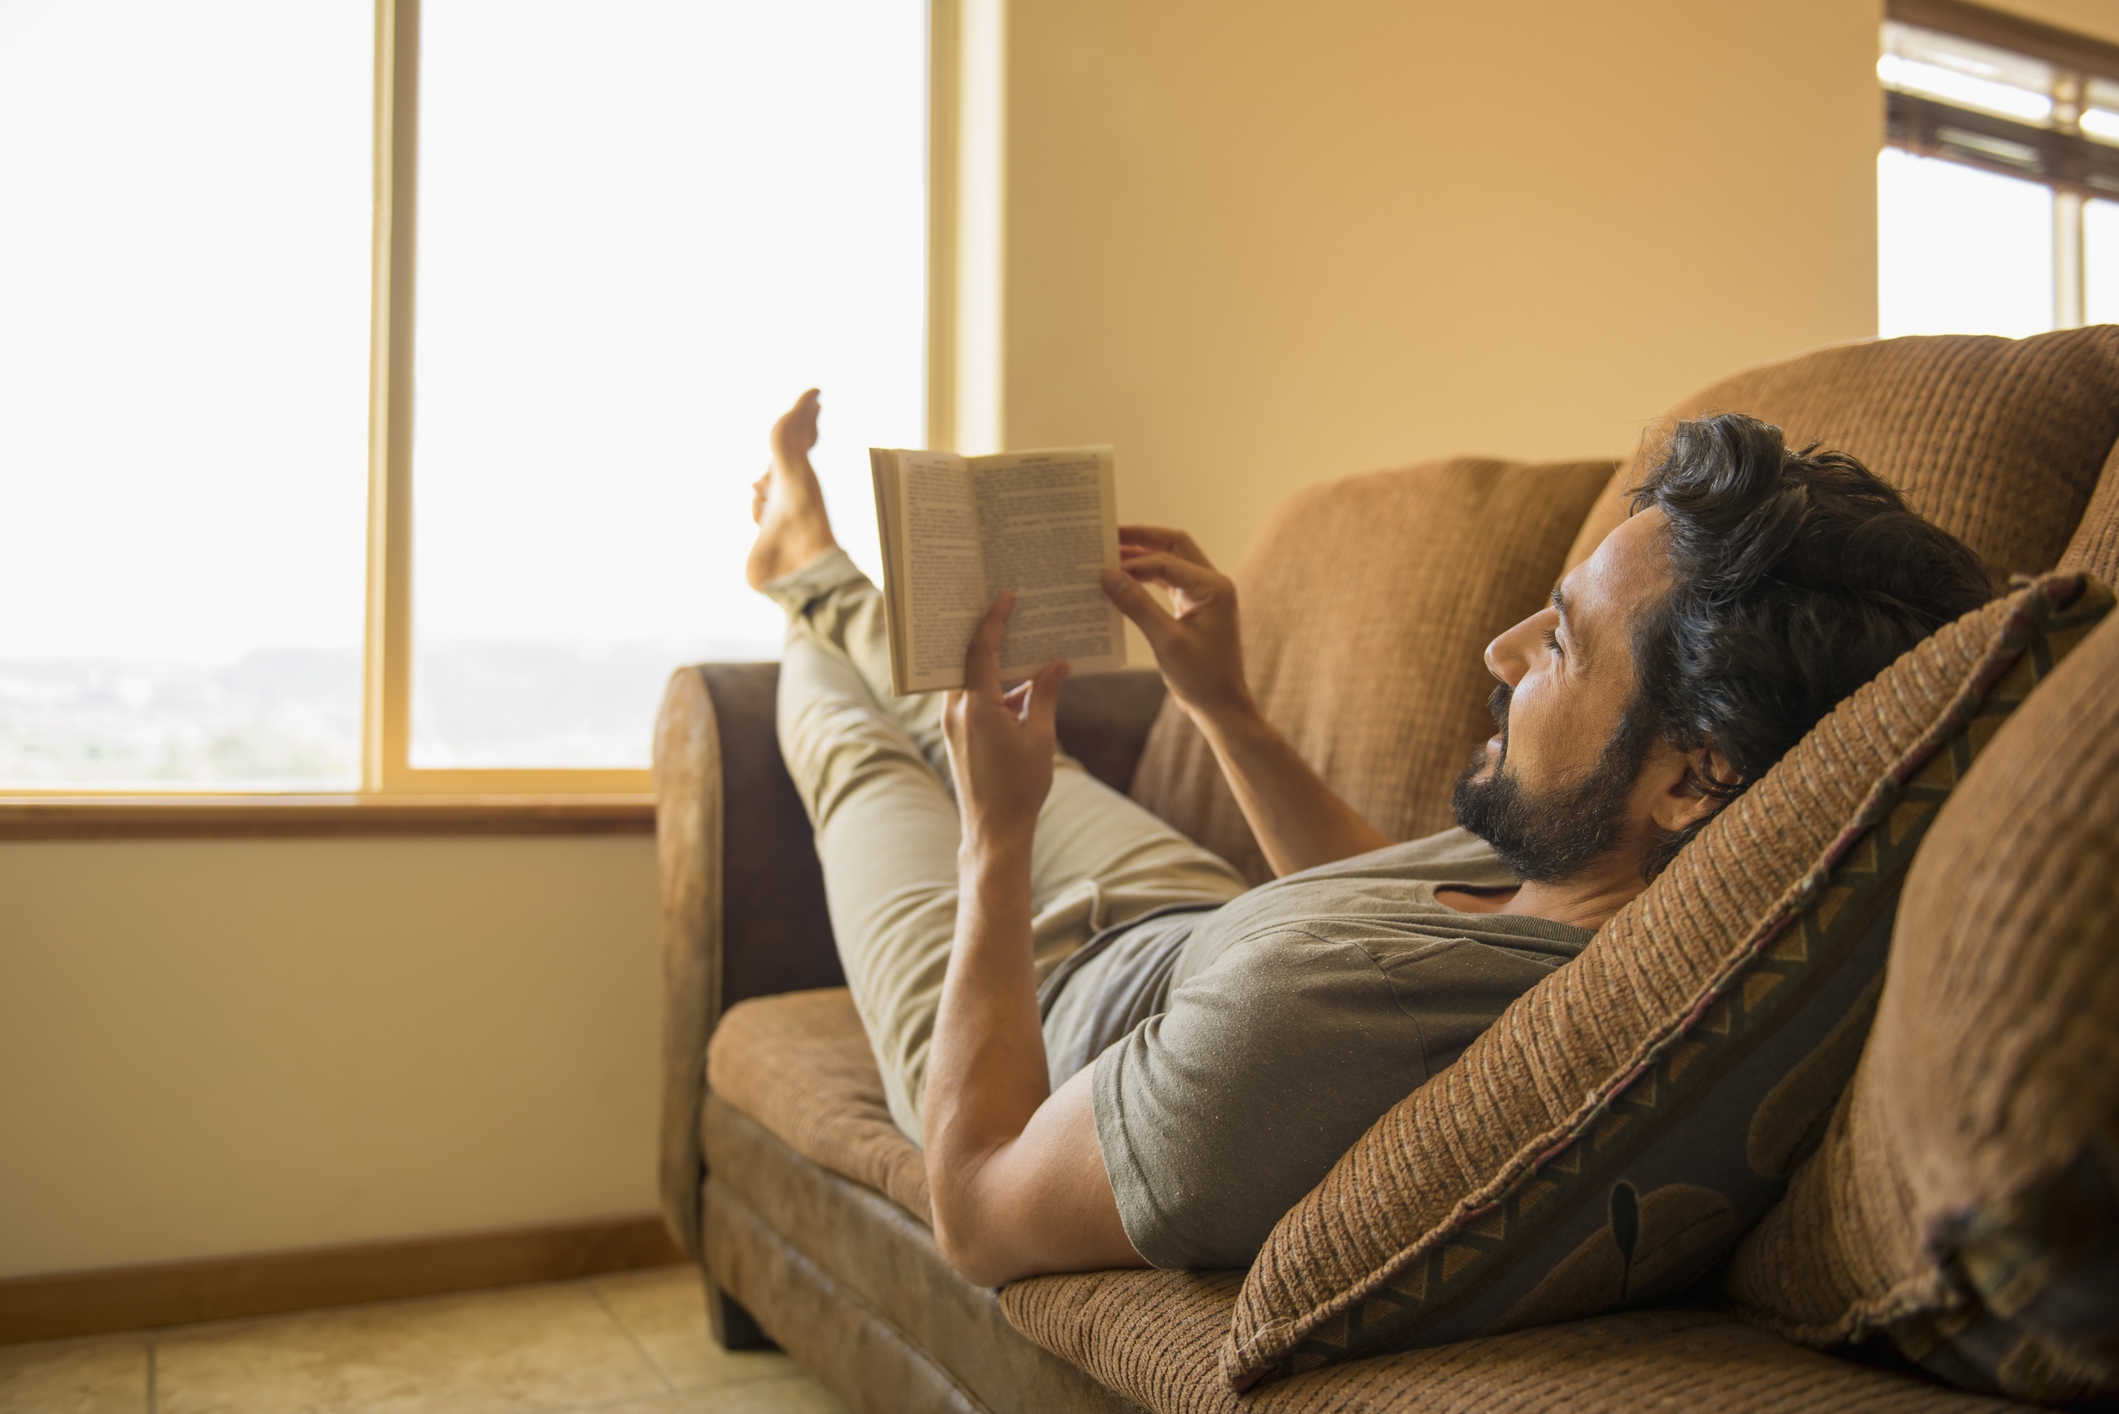 Person lounging on a sofa reading a book by a window, relaxed setting